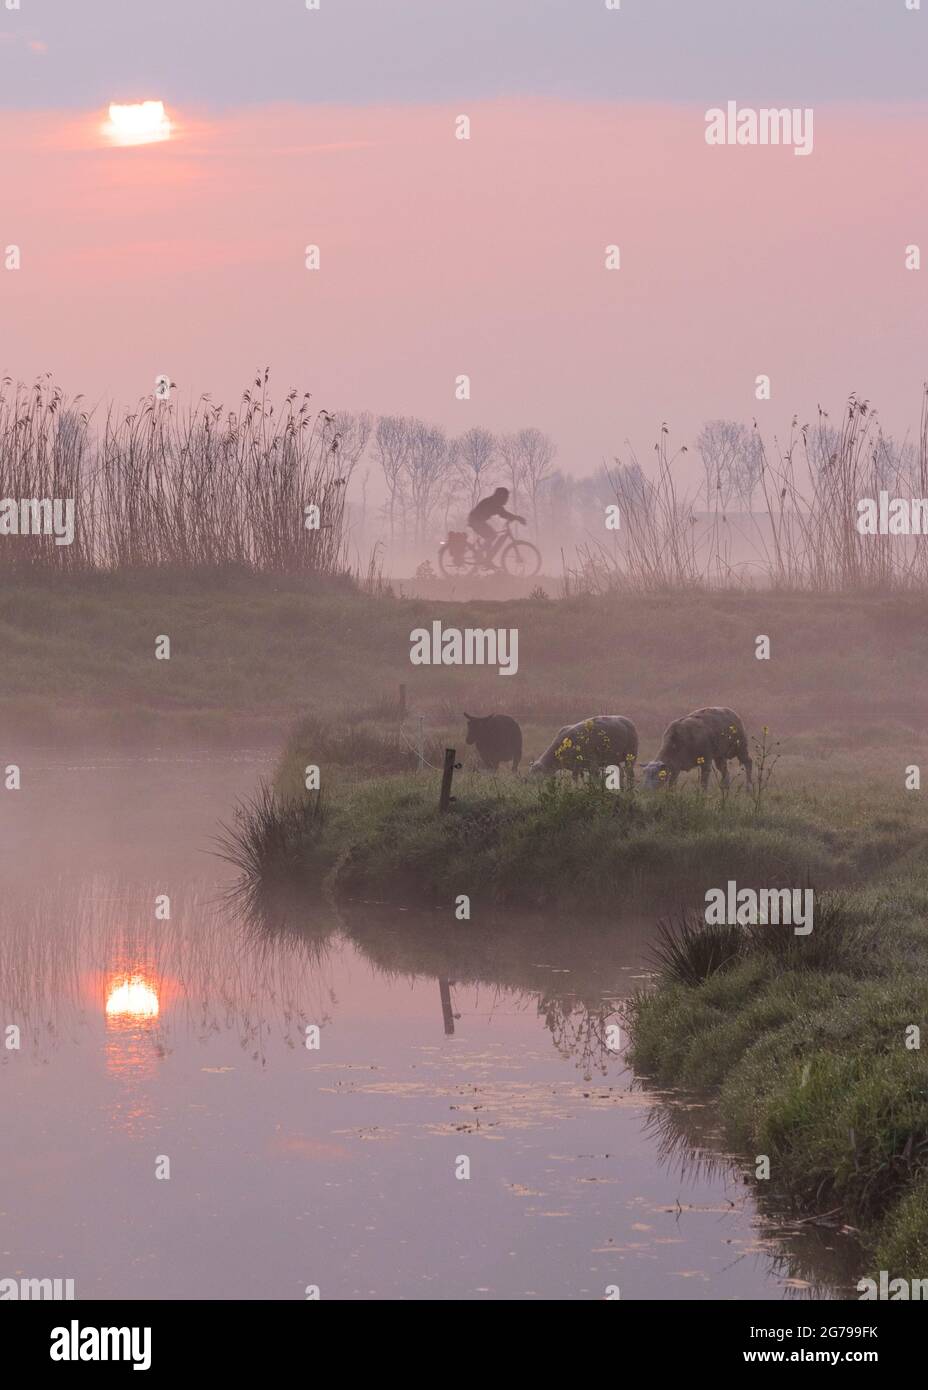 Impressions of a spring hike at sunrise and fog in South Holland in the Alblasserwaard Vijfheerenlanden region near Kinderdijk: polders, sheep and cyclists. Typically Dutch. Stock Photo